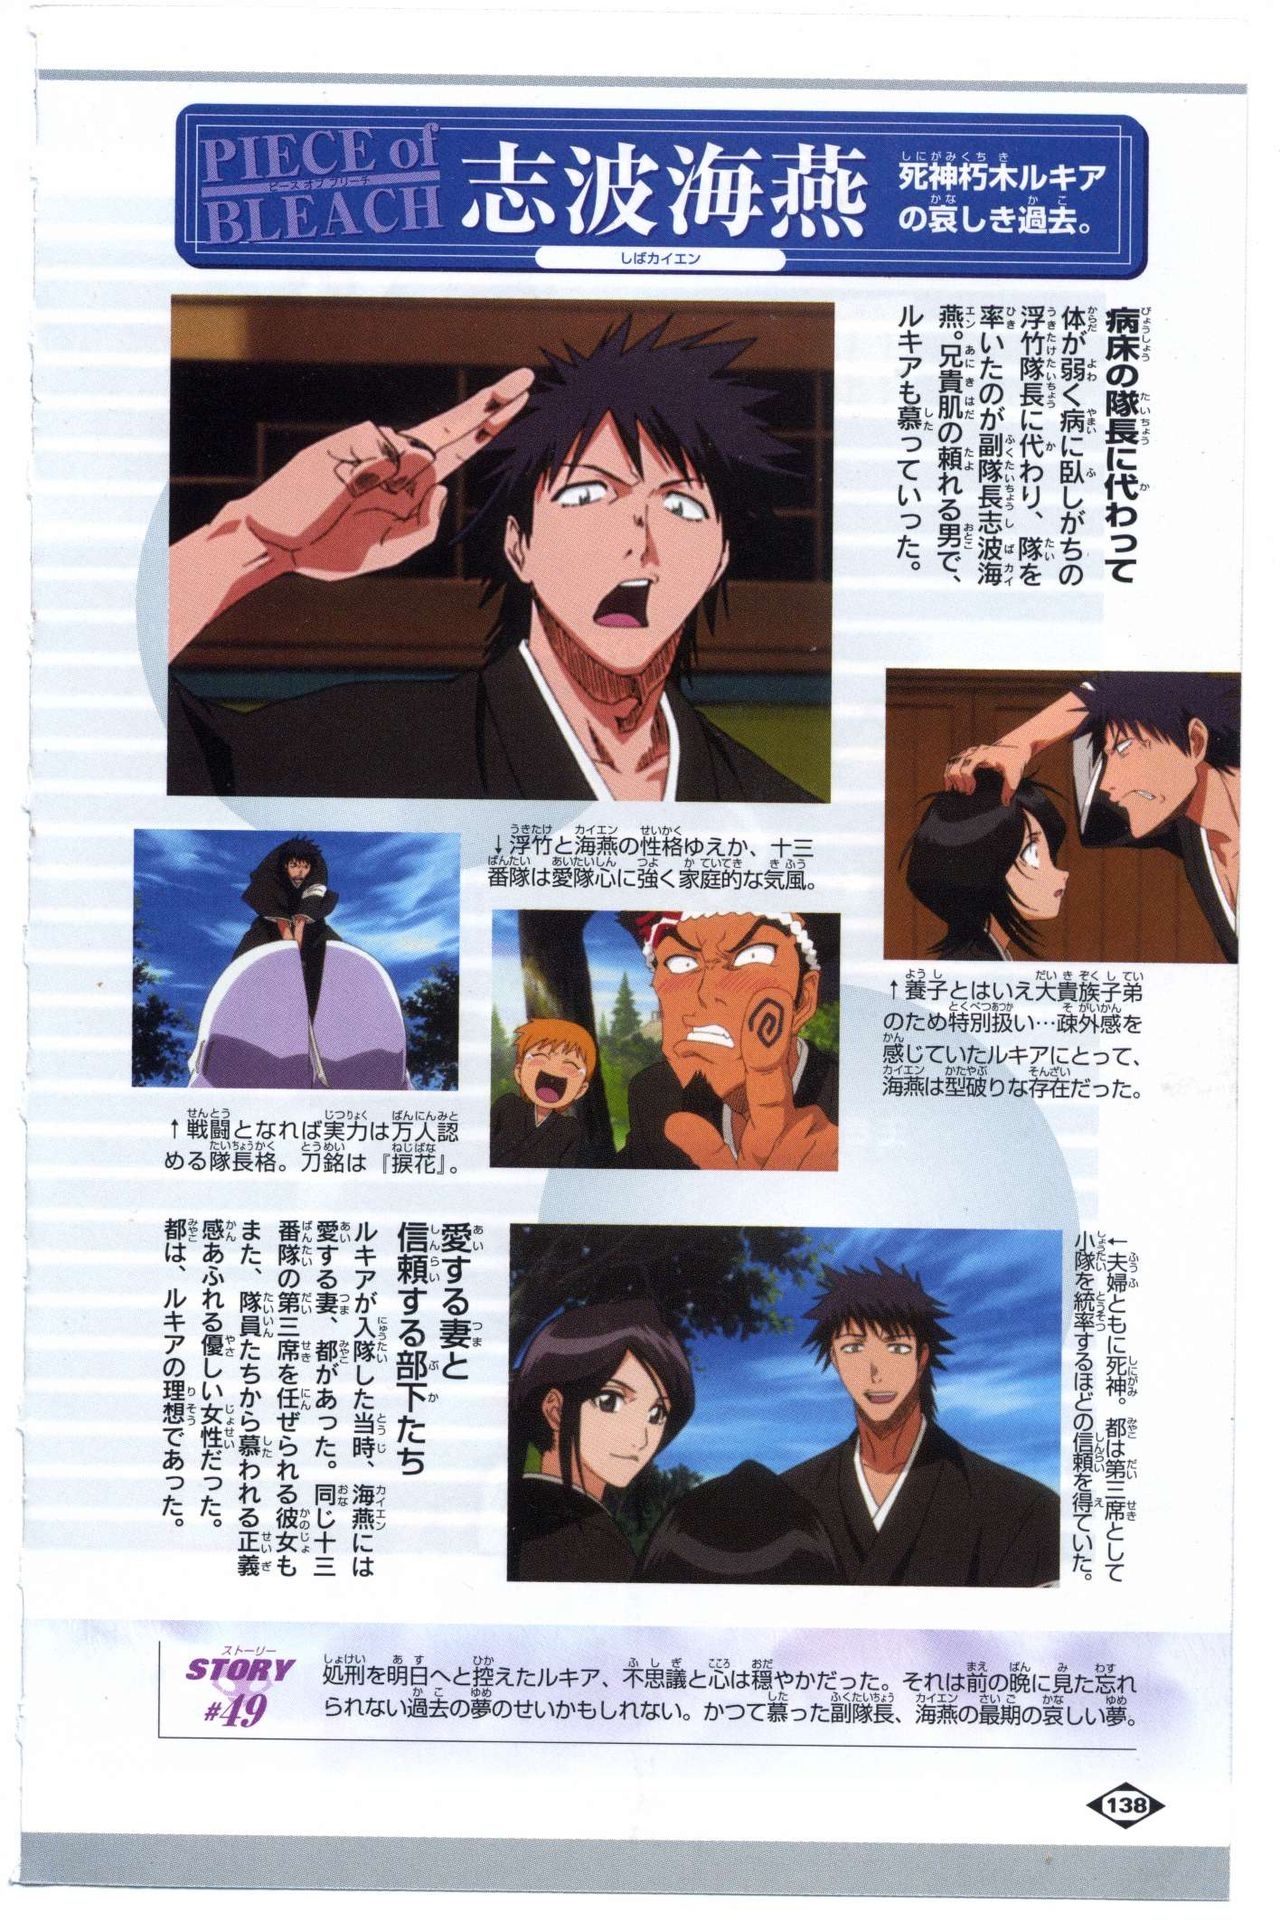 Bleach: Official Animation Book VIBEs 138